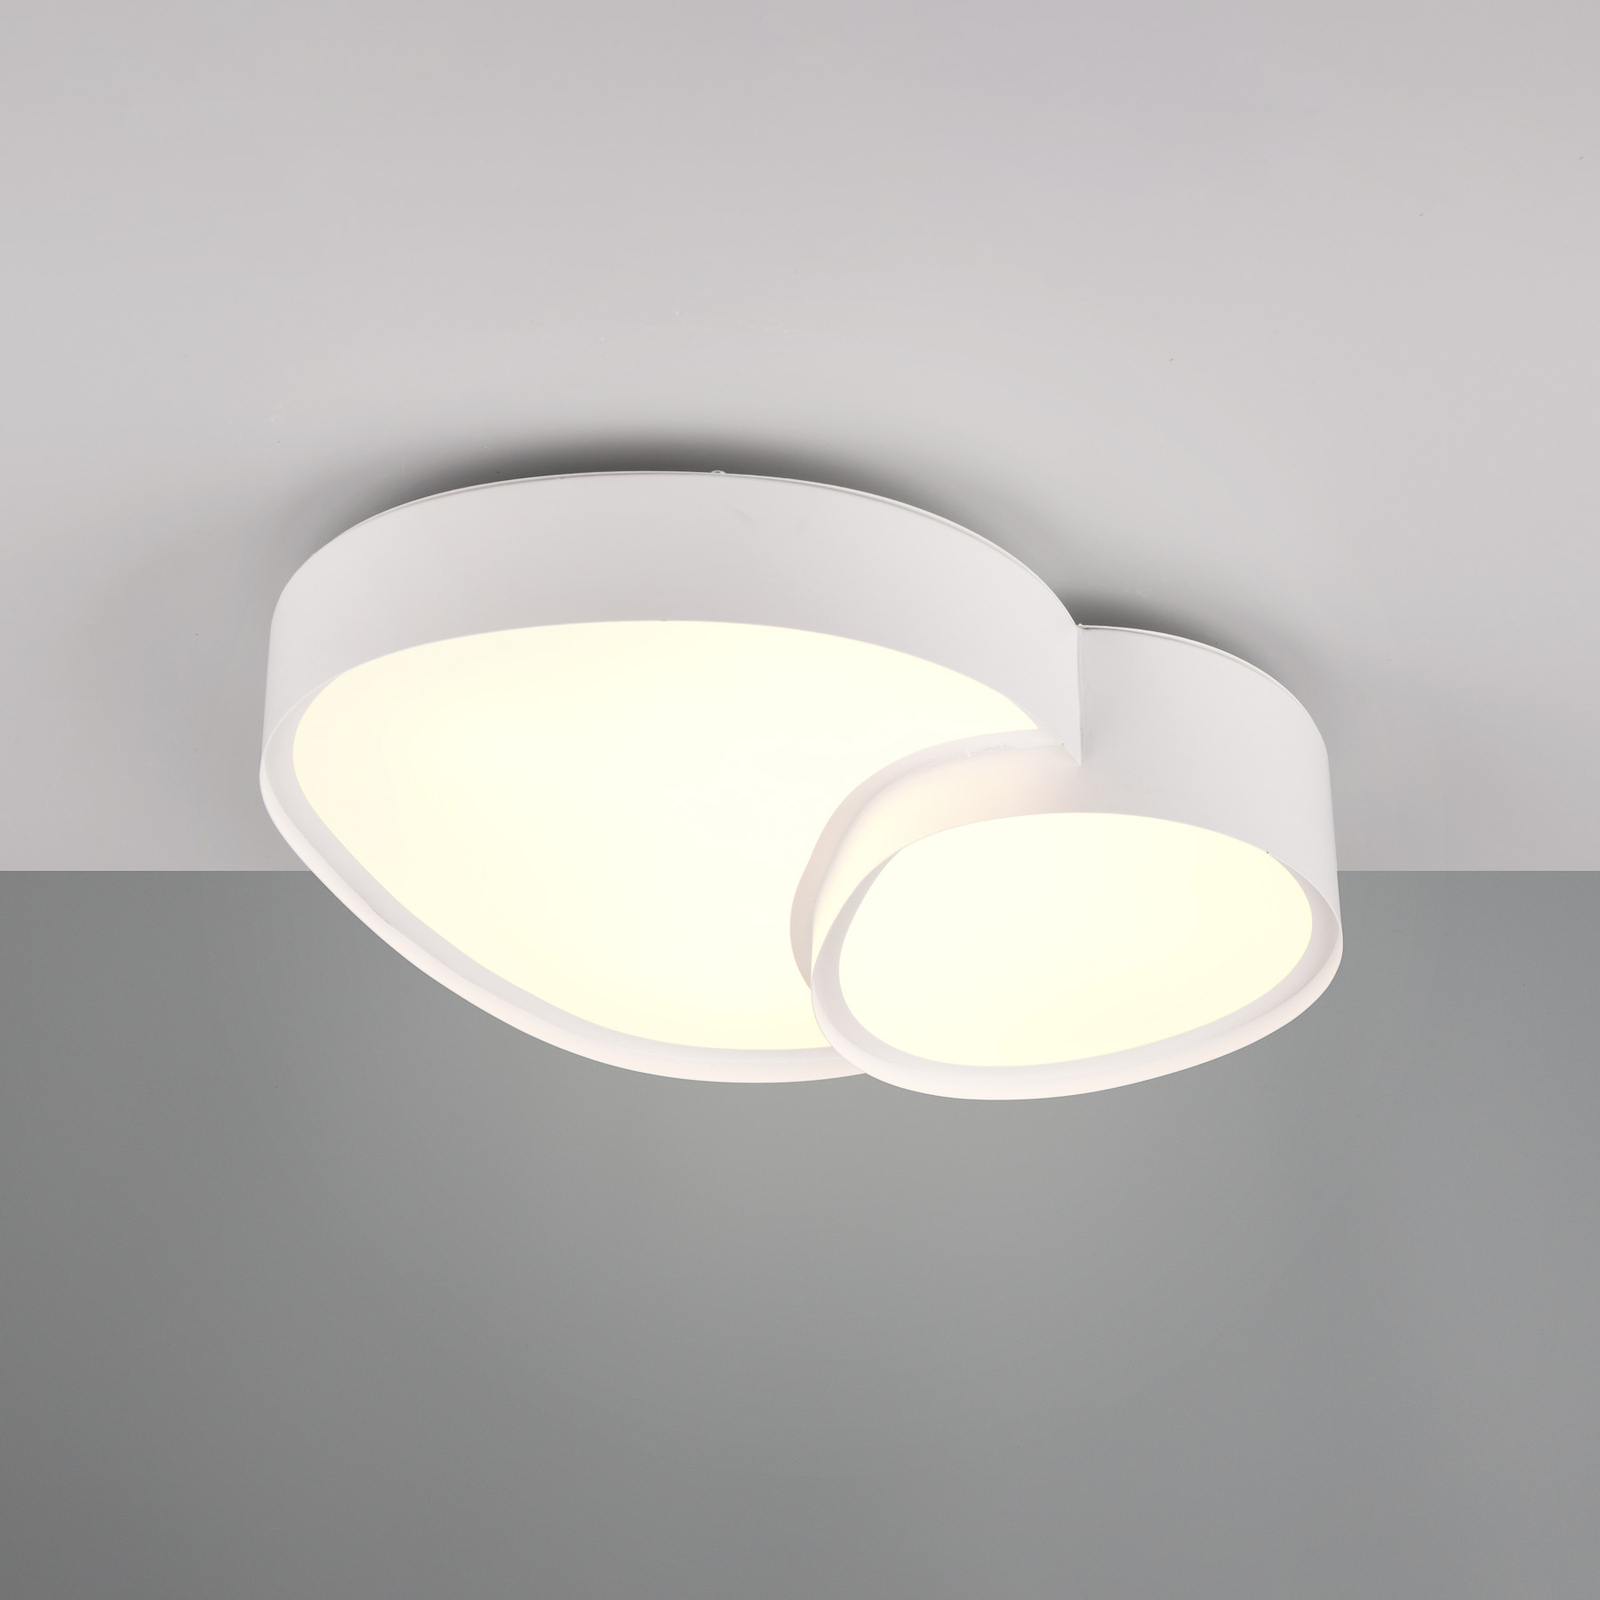 LED ceiling light Rise, white, 43 x 36 cm, CCT, dimmable